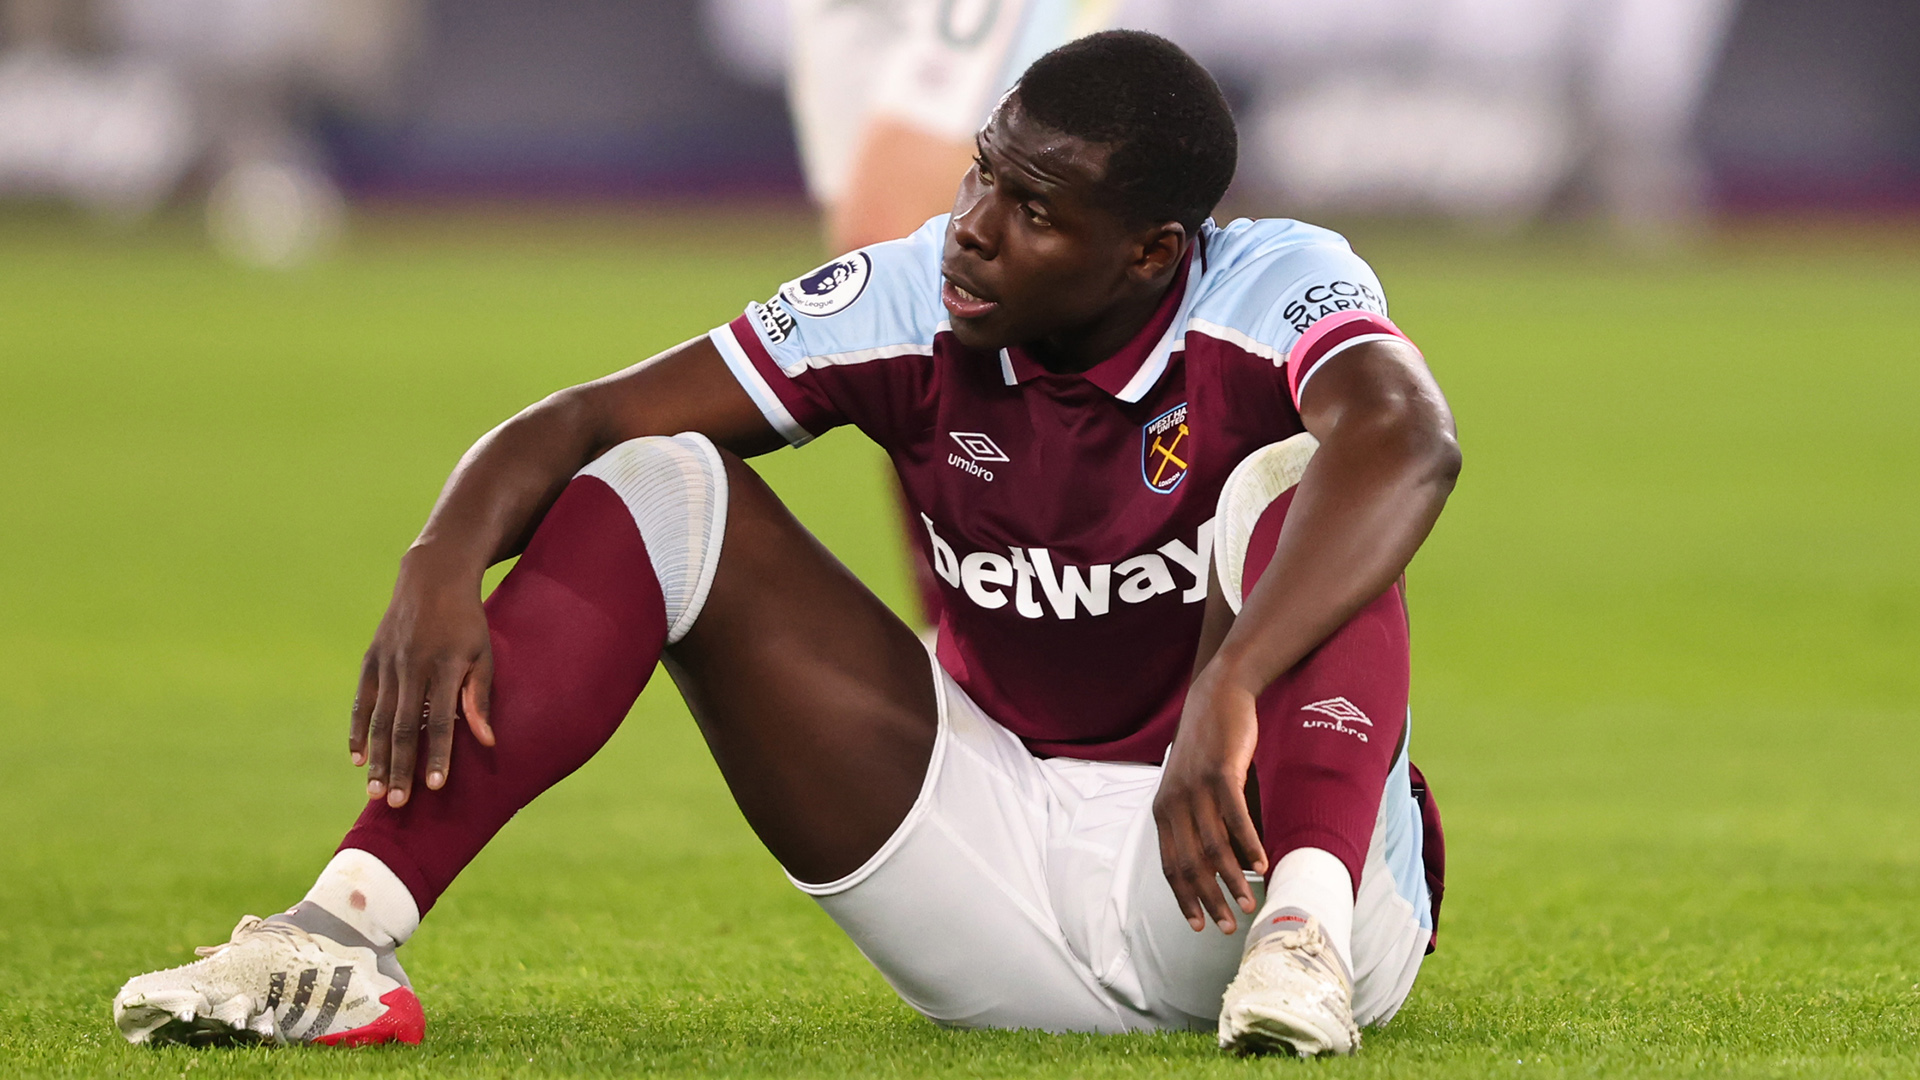 Kurt Zouma of West Ham United sentenced to 180 hours of Community Service after kicking cat in a video